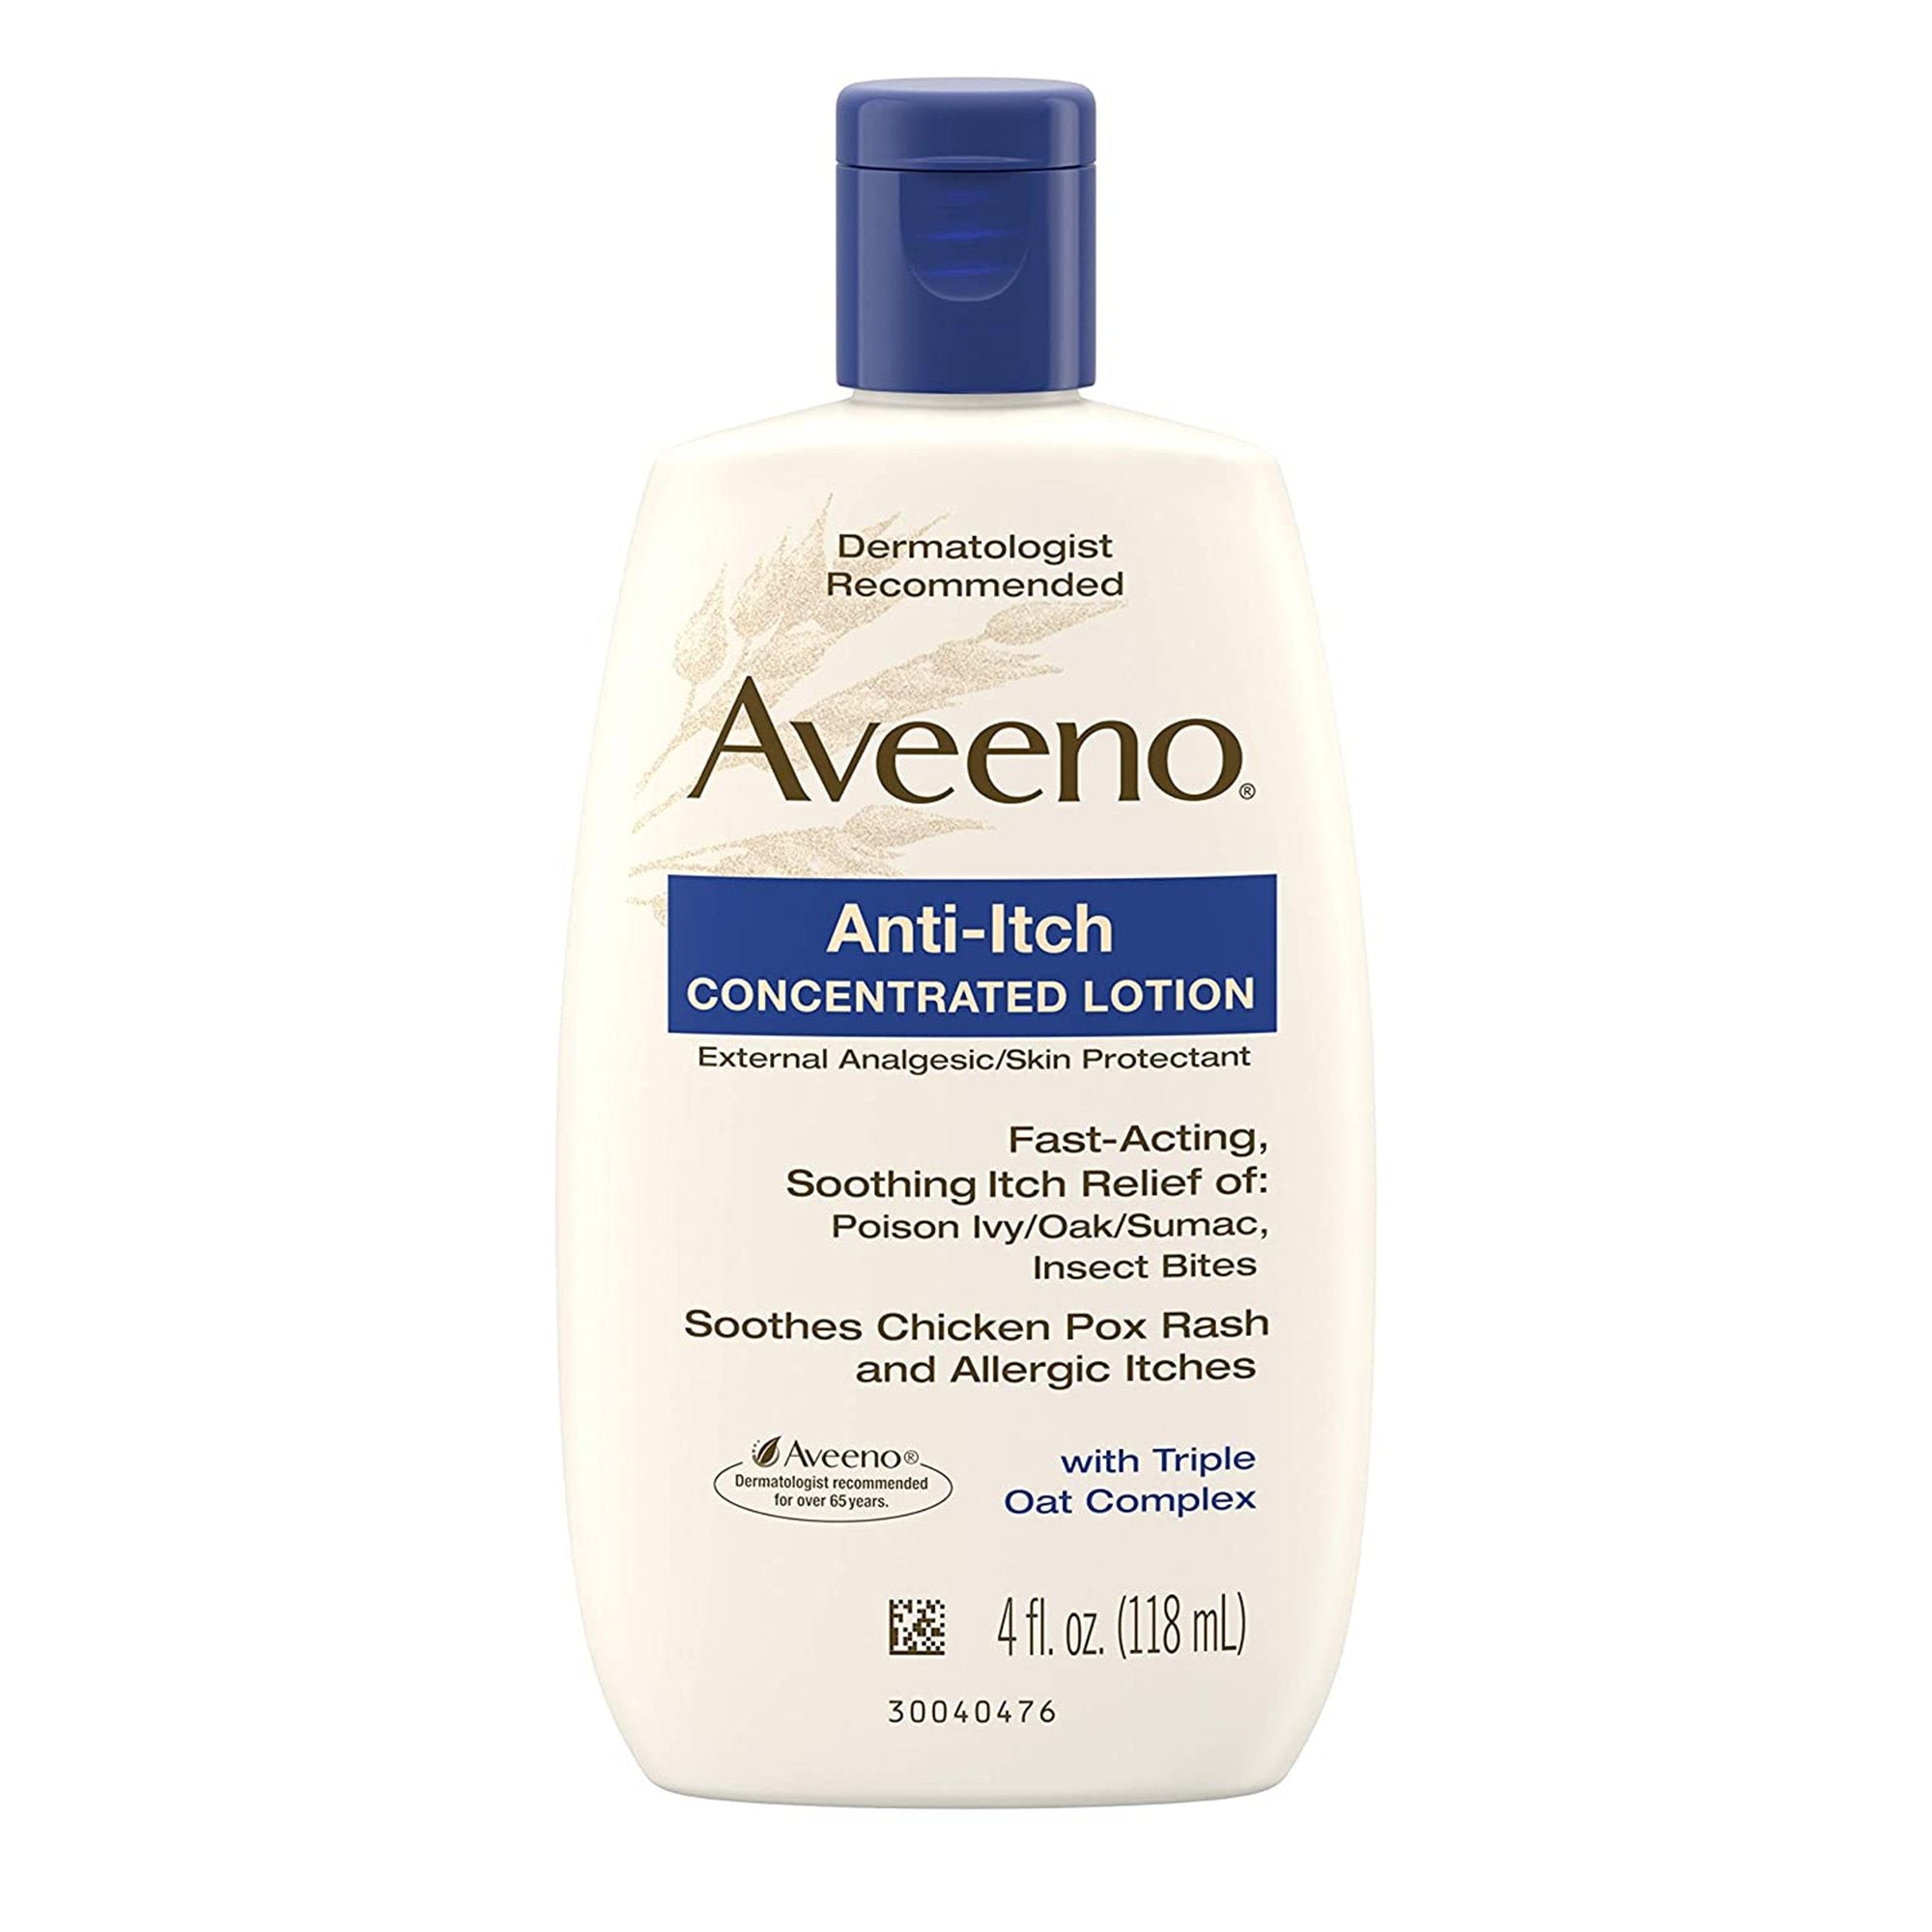 Anti-Itch Hand and Body Lotion Aveeno® Anti-Itch 4 oz. Bottle Unscented Lotion